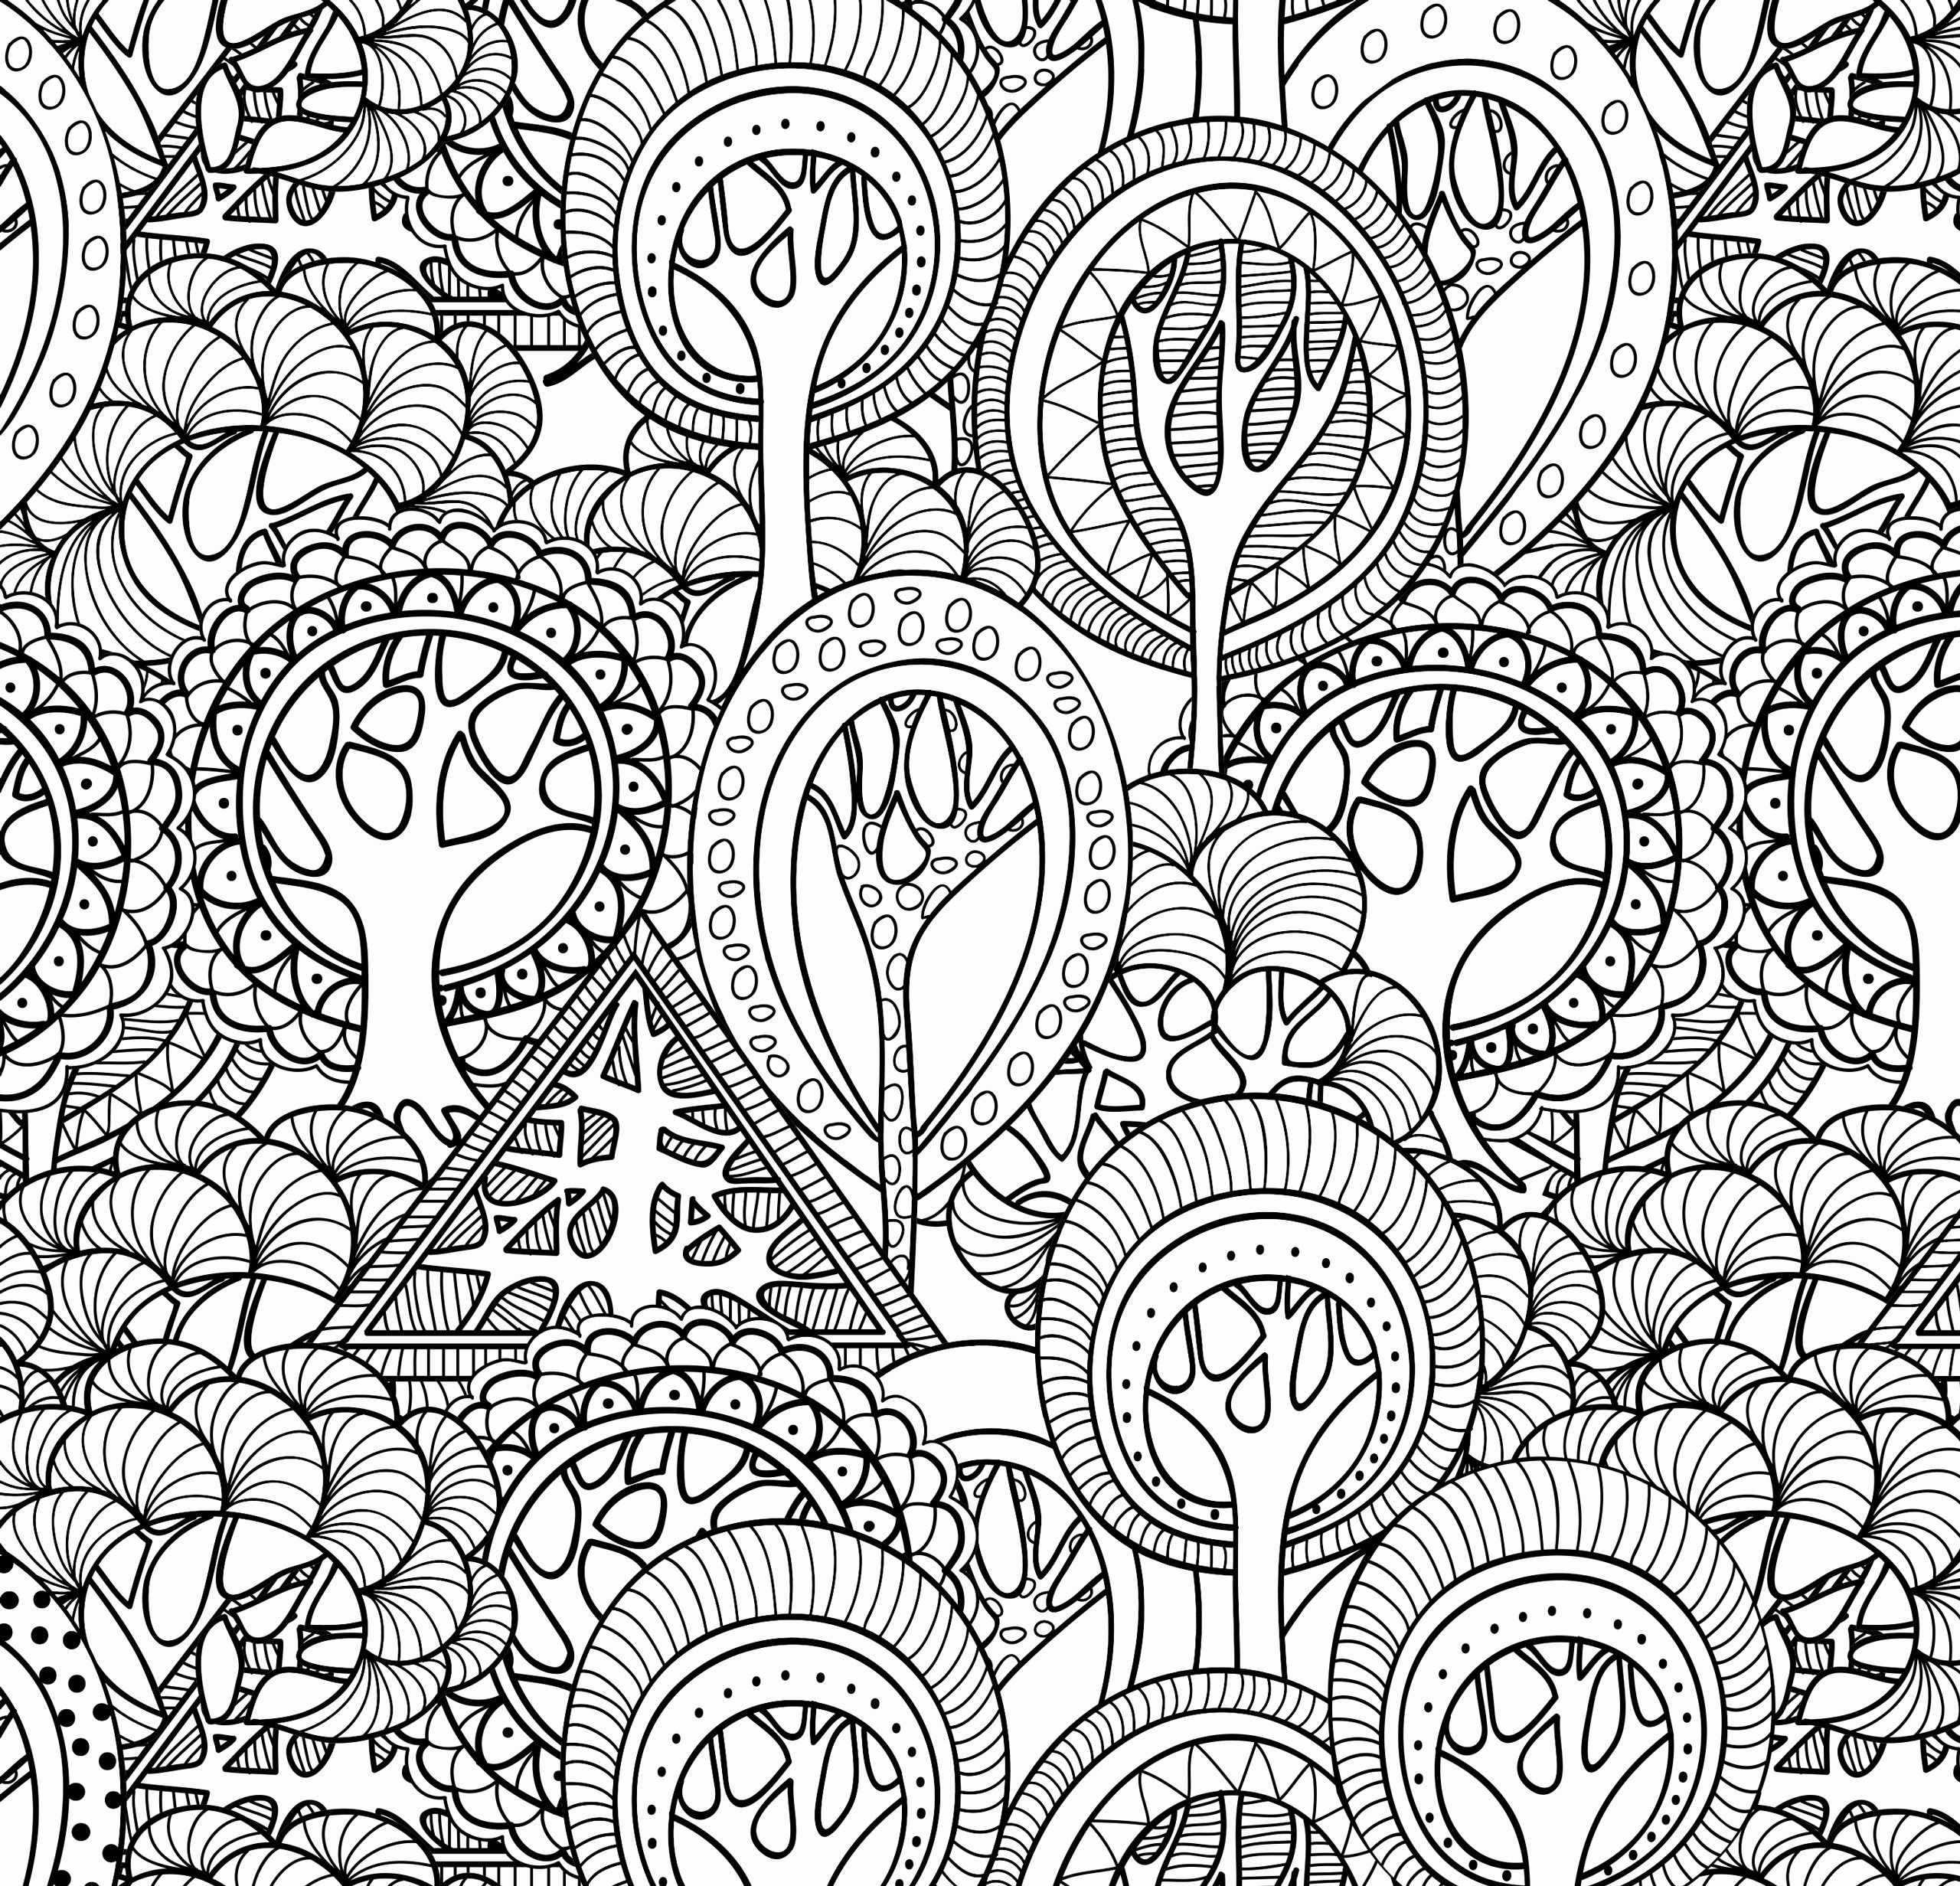 22 Fantastic Vase Of Flowers Art 2024 free download vase of flowers art of popular coloring pages best of cool vases flower vase coloring page with cool vases flower vase coloring page pages flowers in a top i 0d